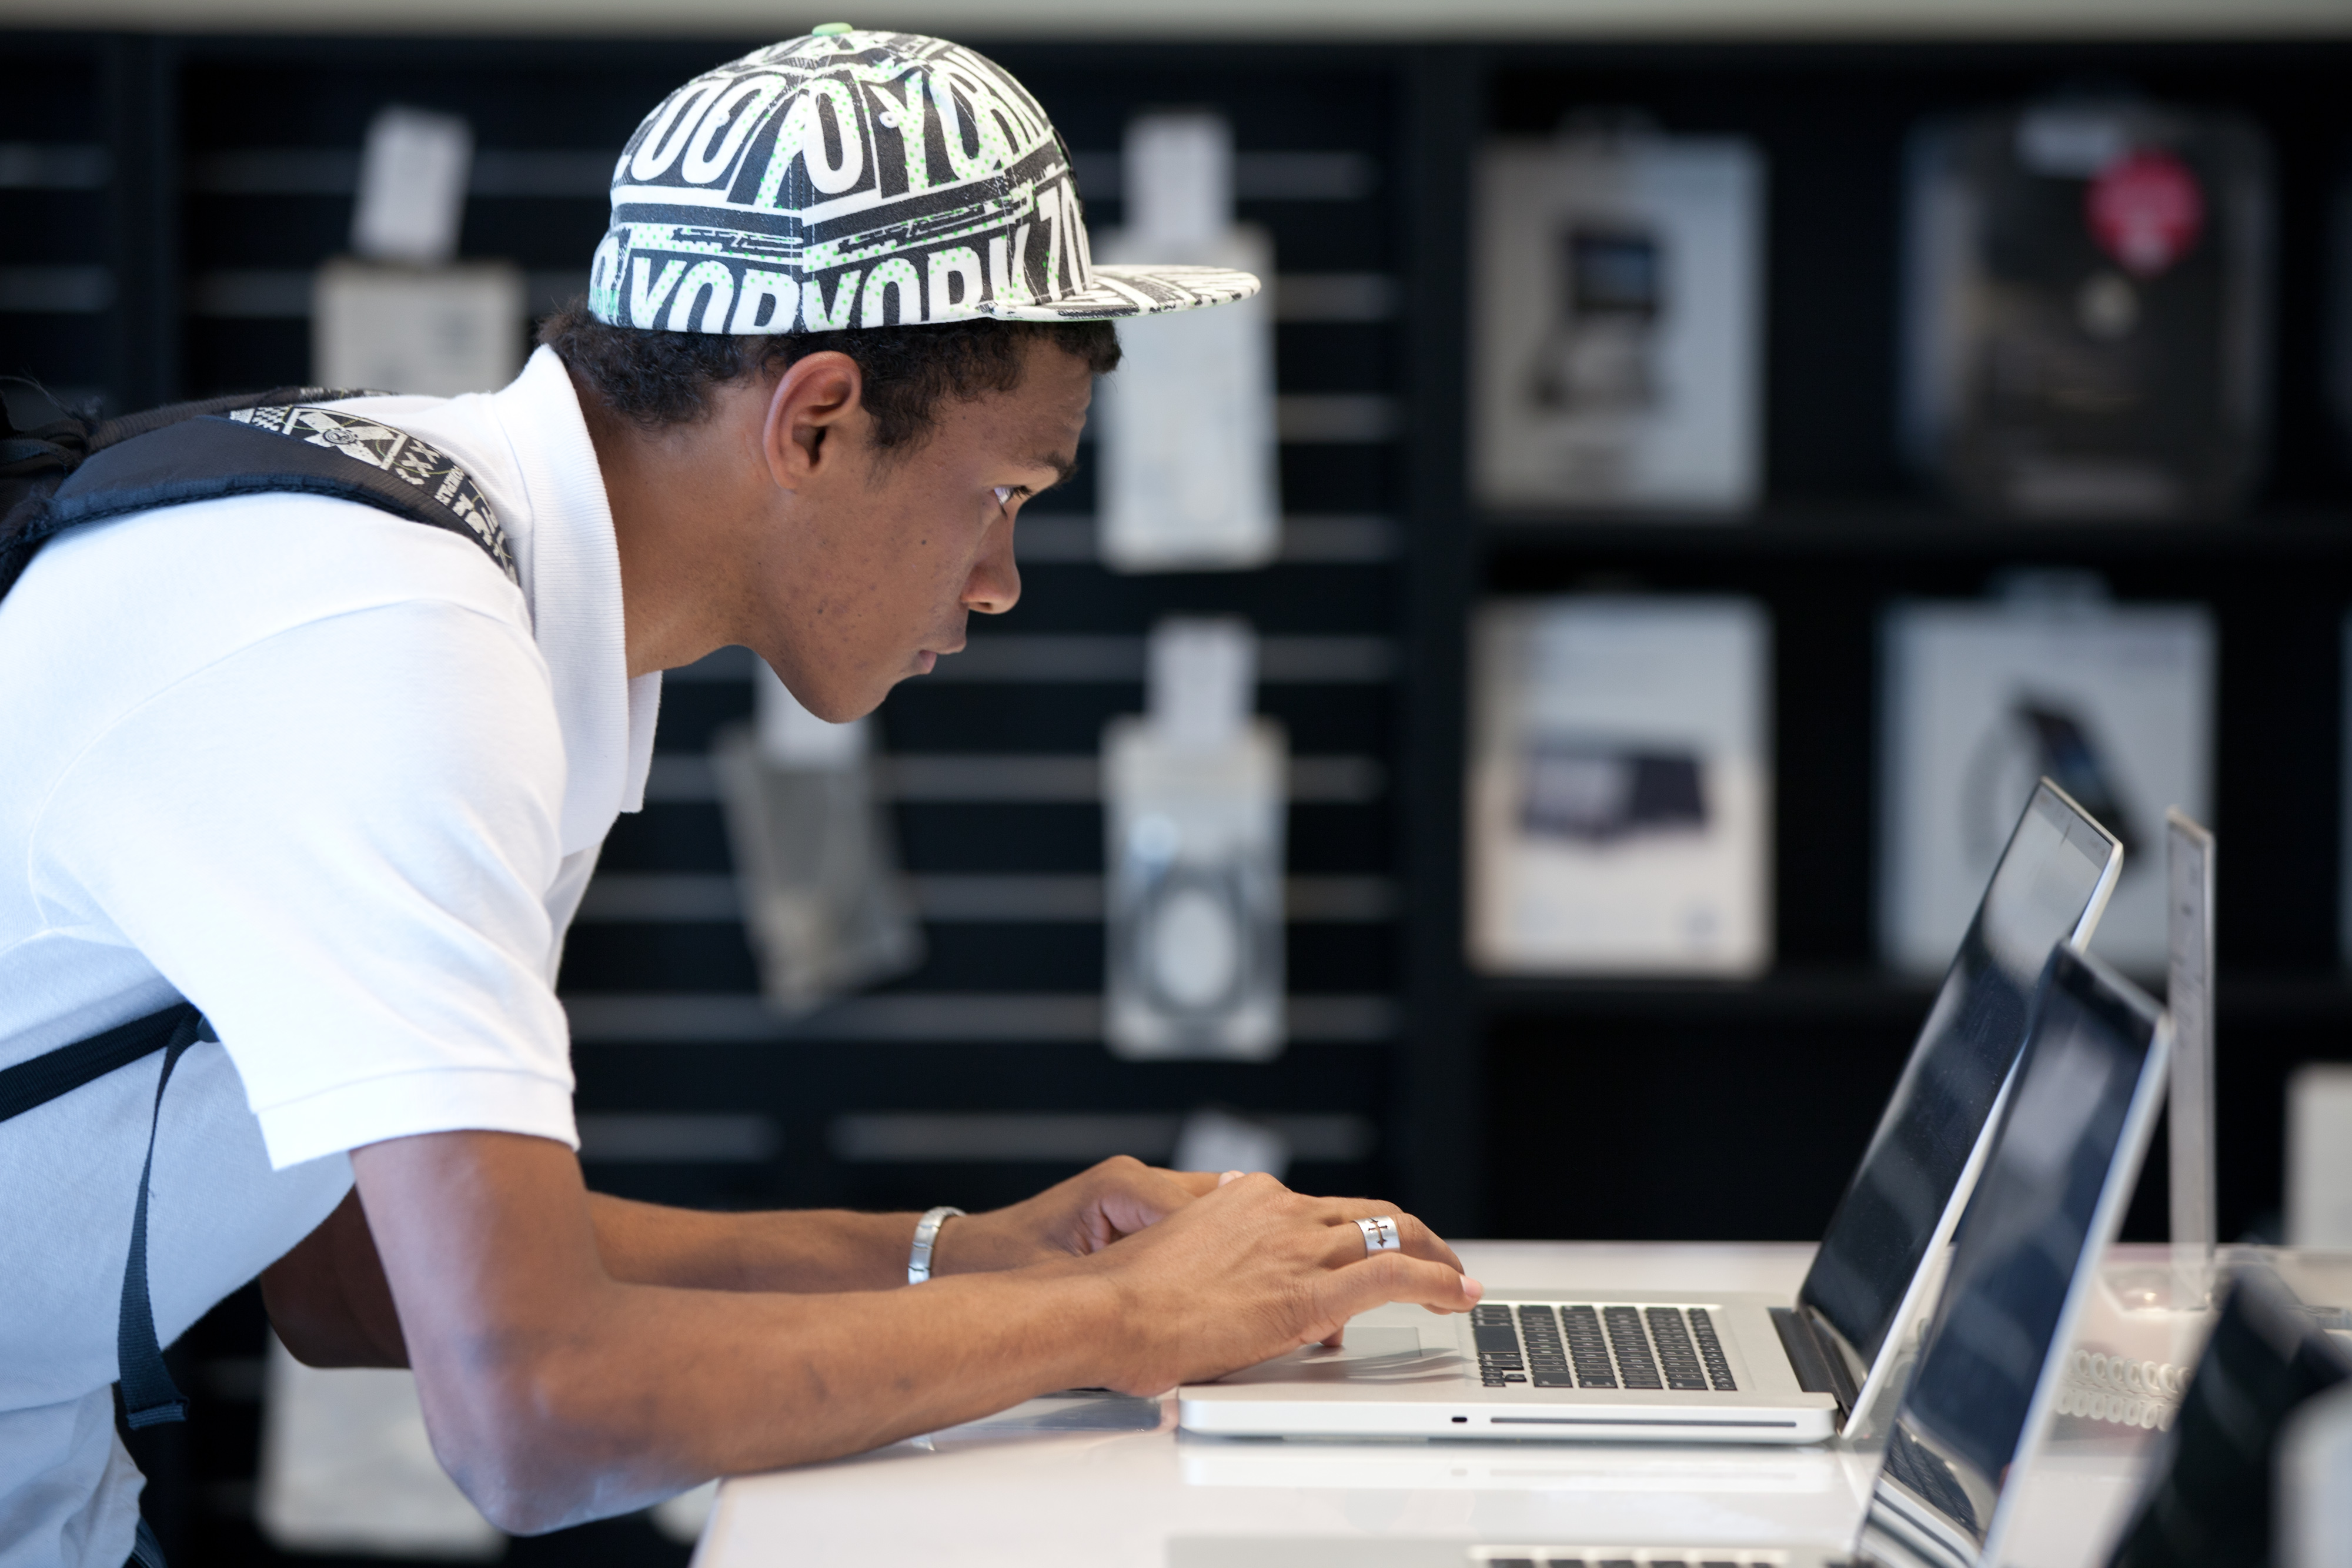 A Brazilian man looks at Apple's Macbook pro at the retail shop of Apple products in Sao Paulo. (AFP&mdash;AFP/Getty Images)